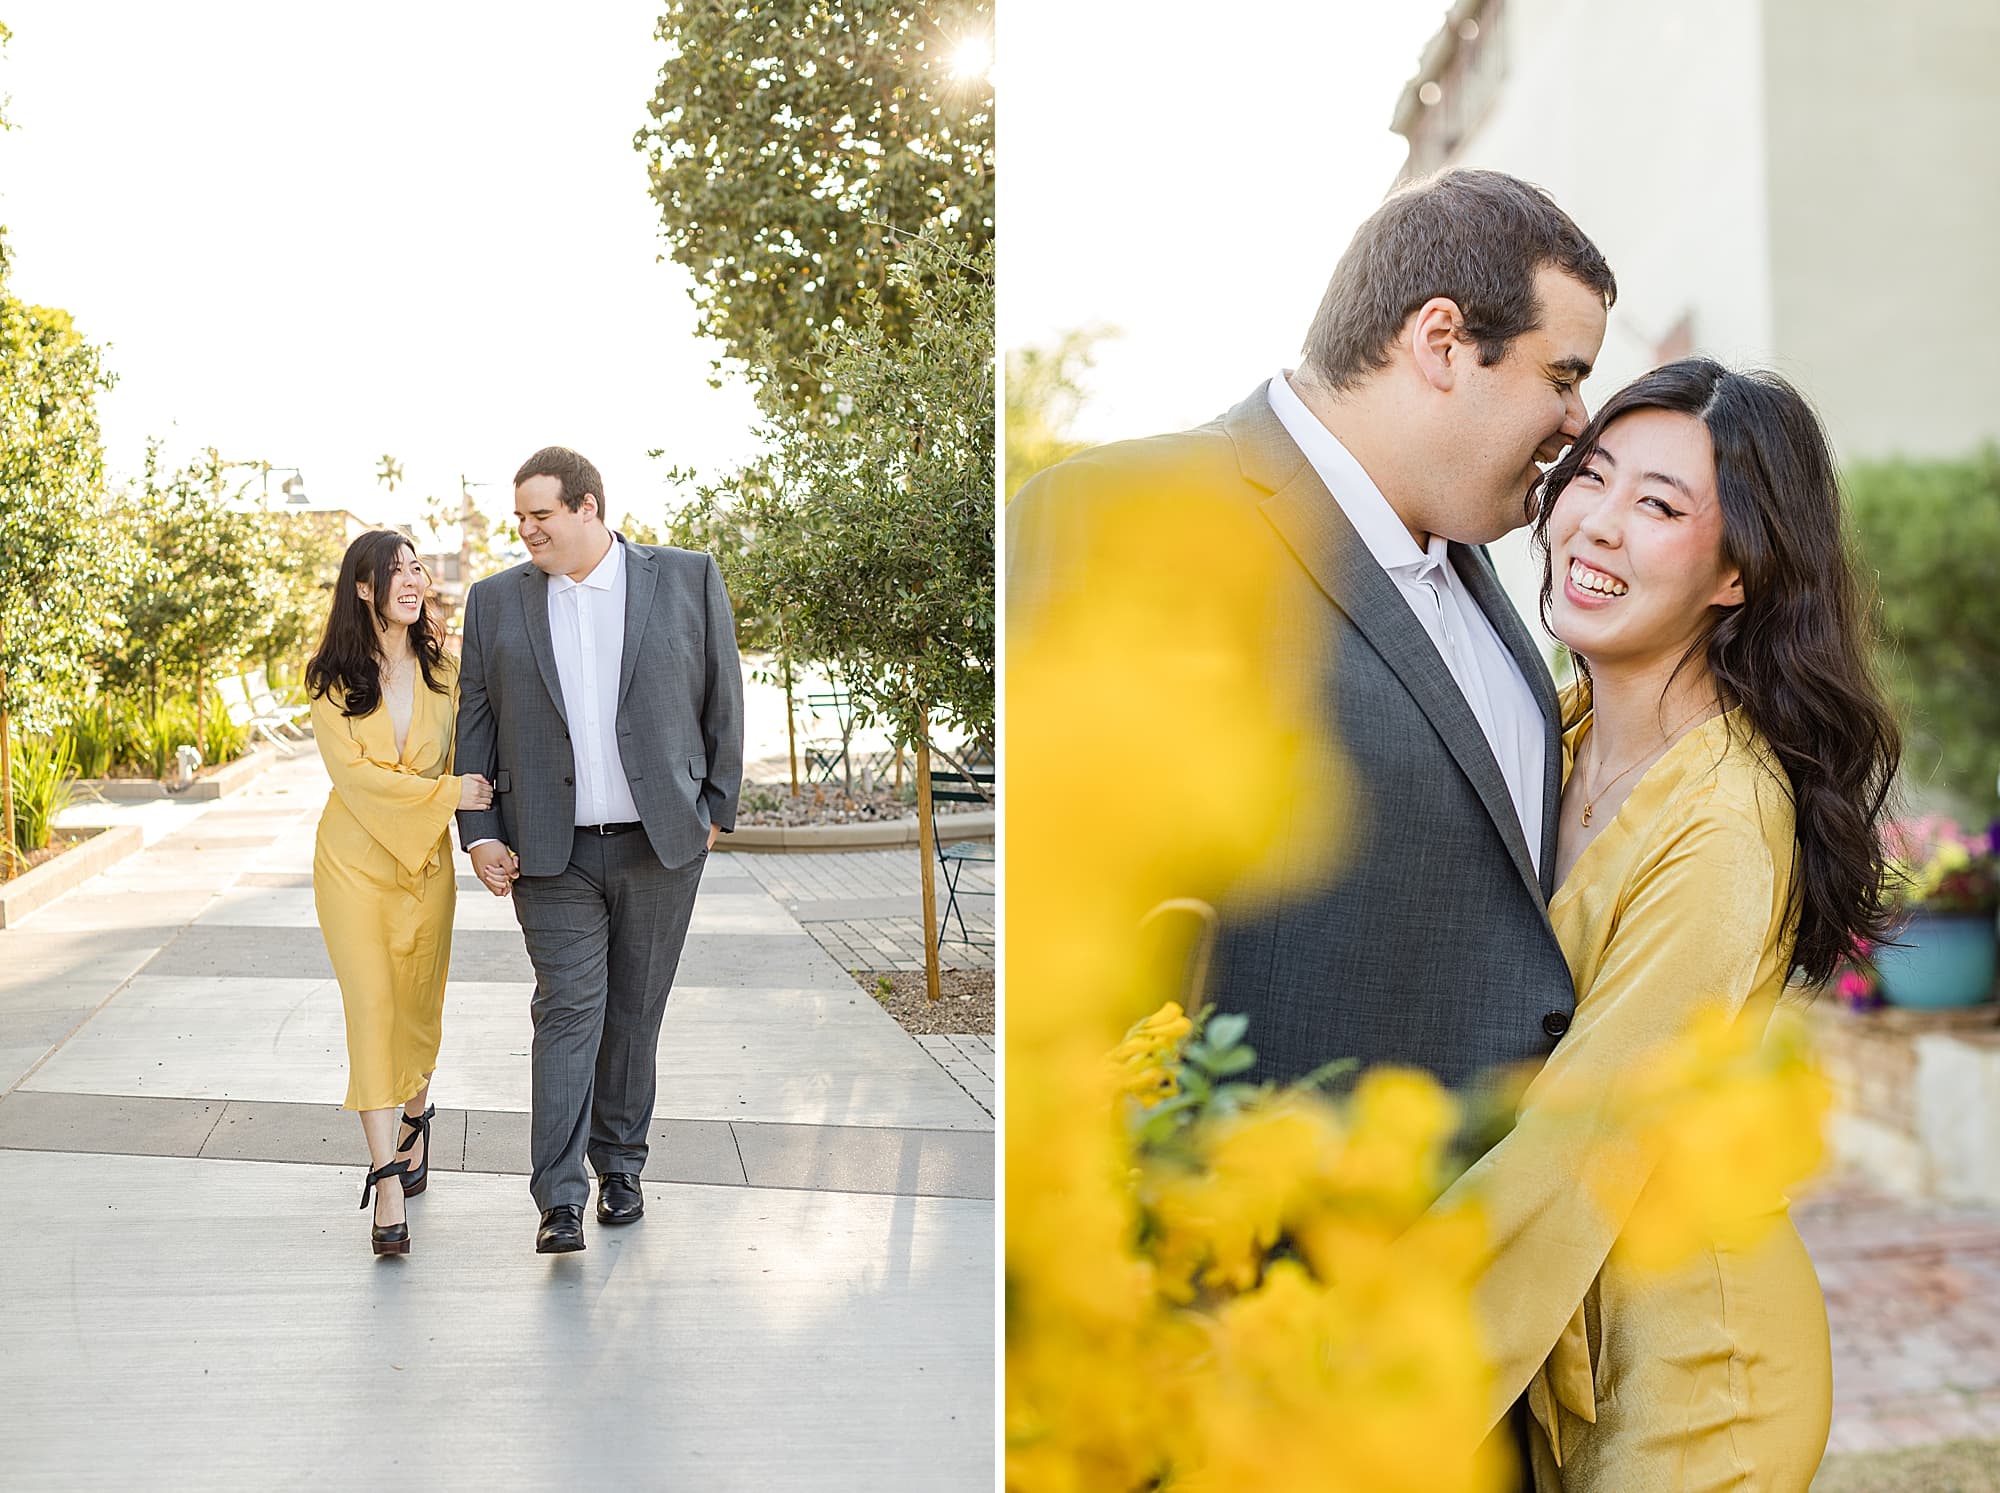 Old Town Engagement Session couple walking